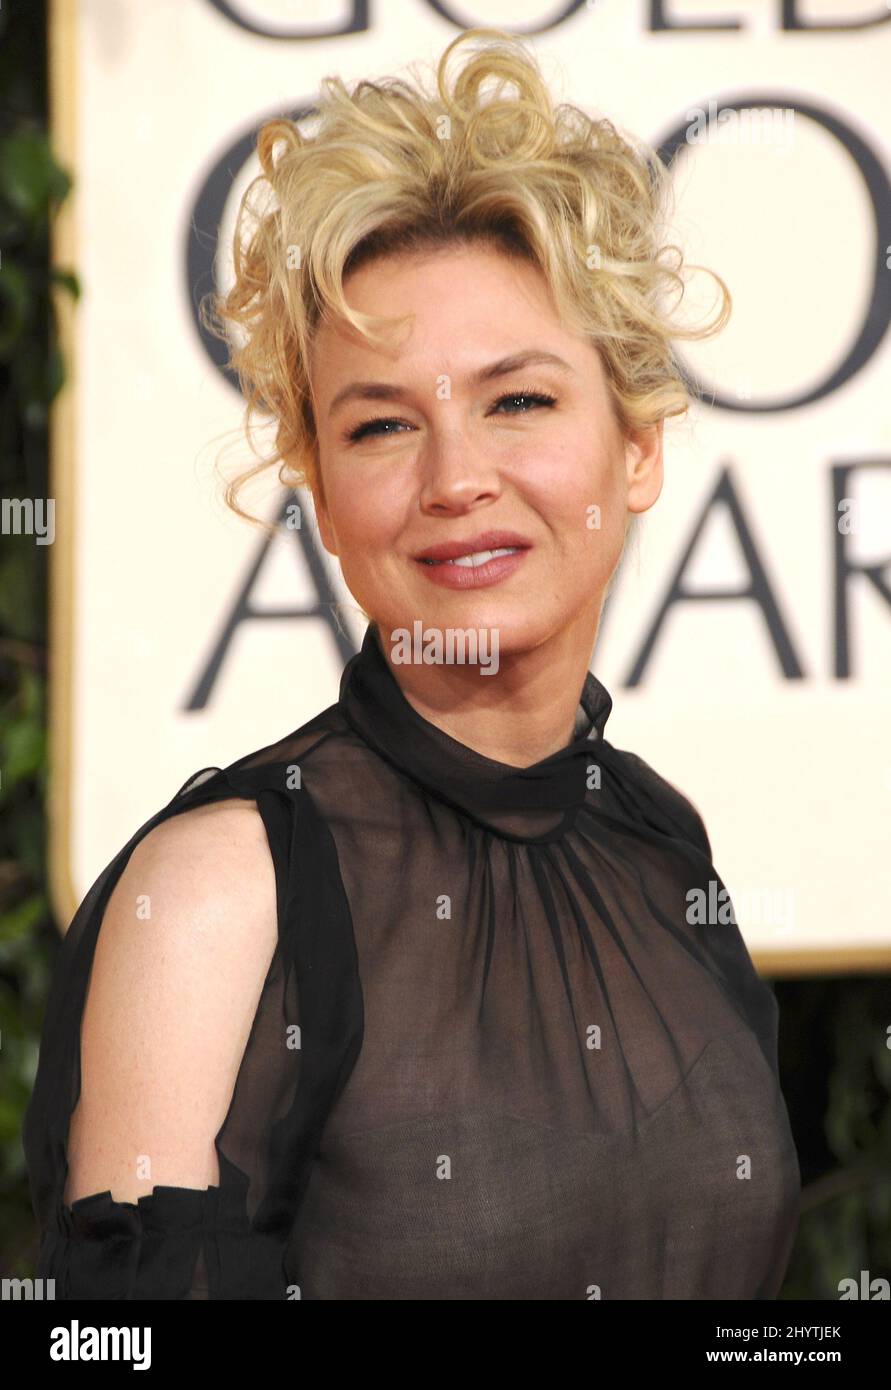 Renee Zellweger at the 66th Annual Golden Globe Awards at the Beverly Hilton Hotel. Stock Photo